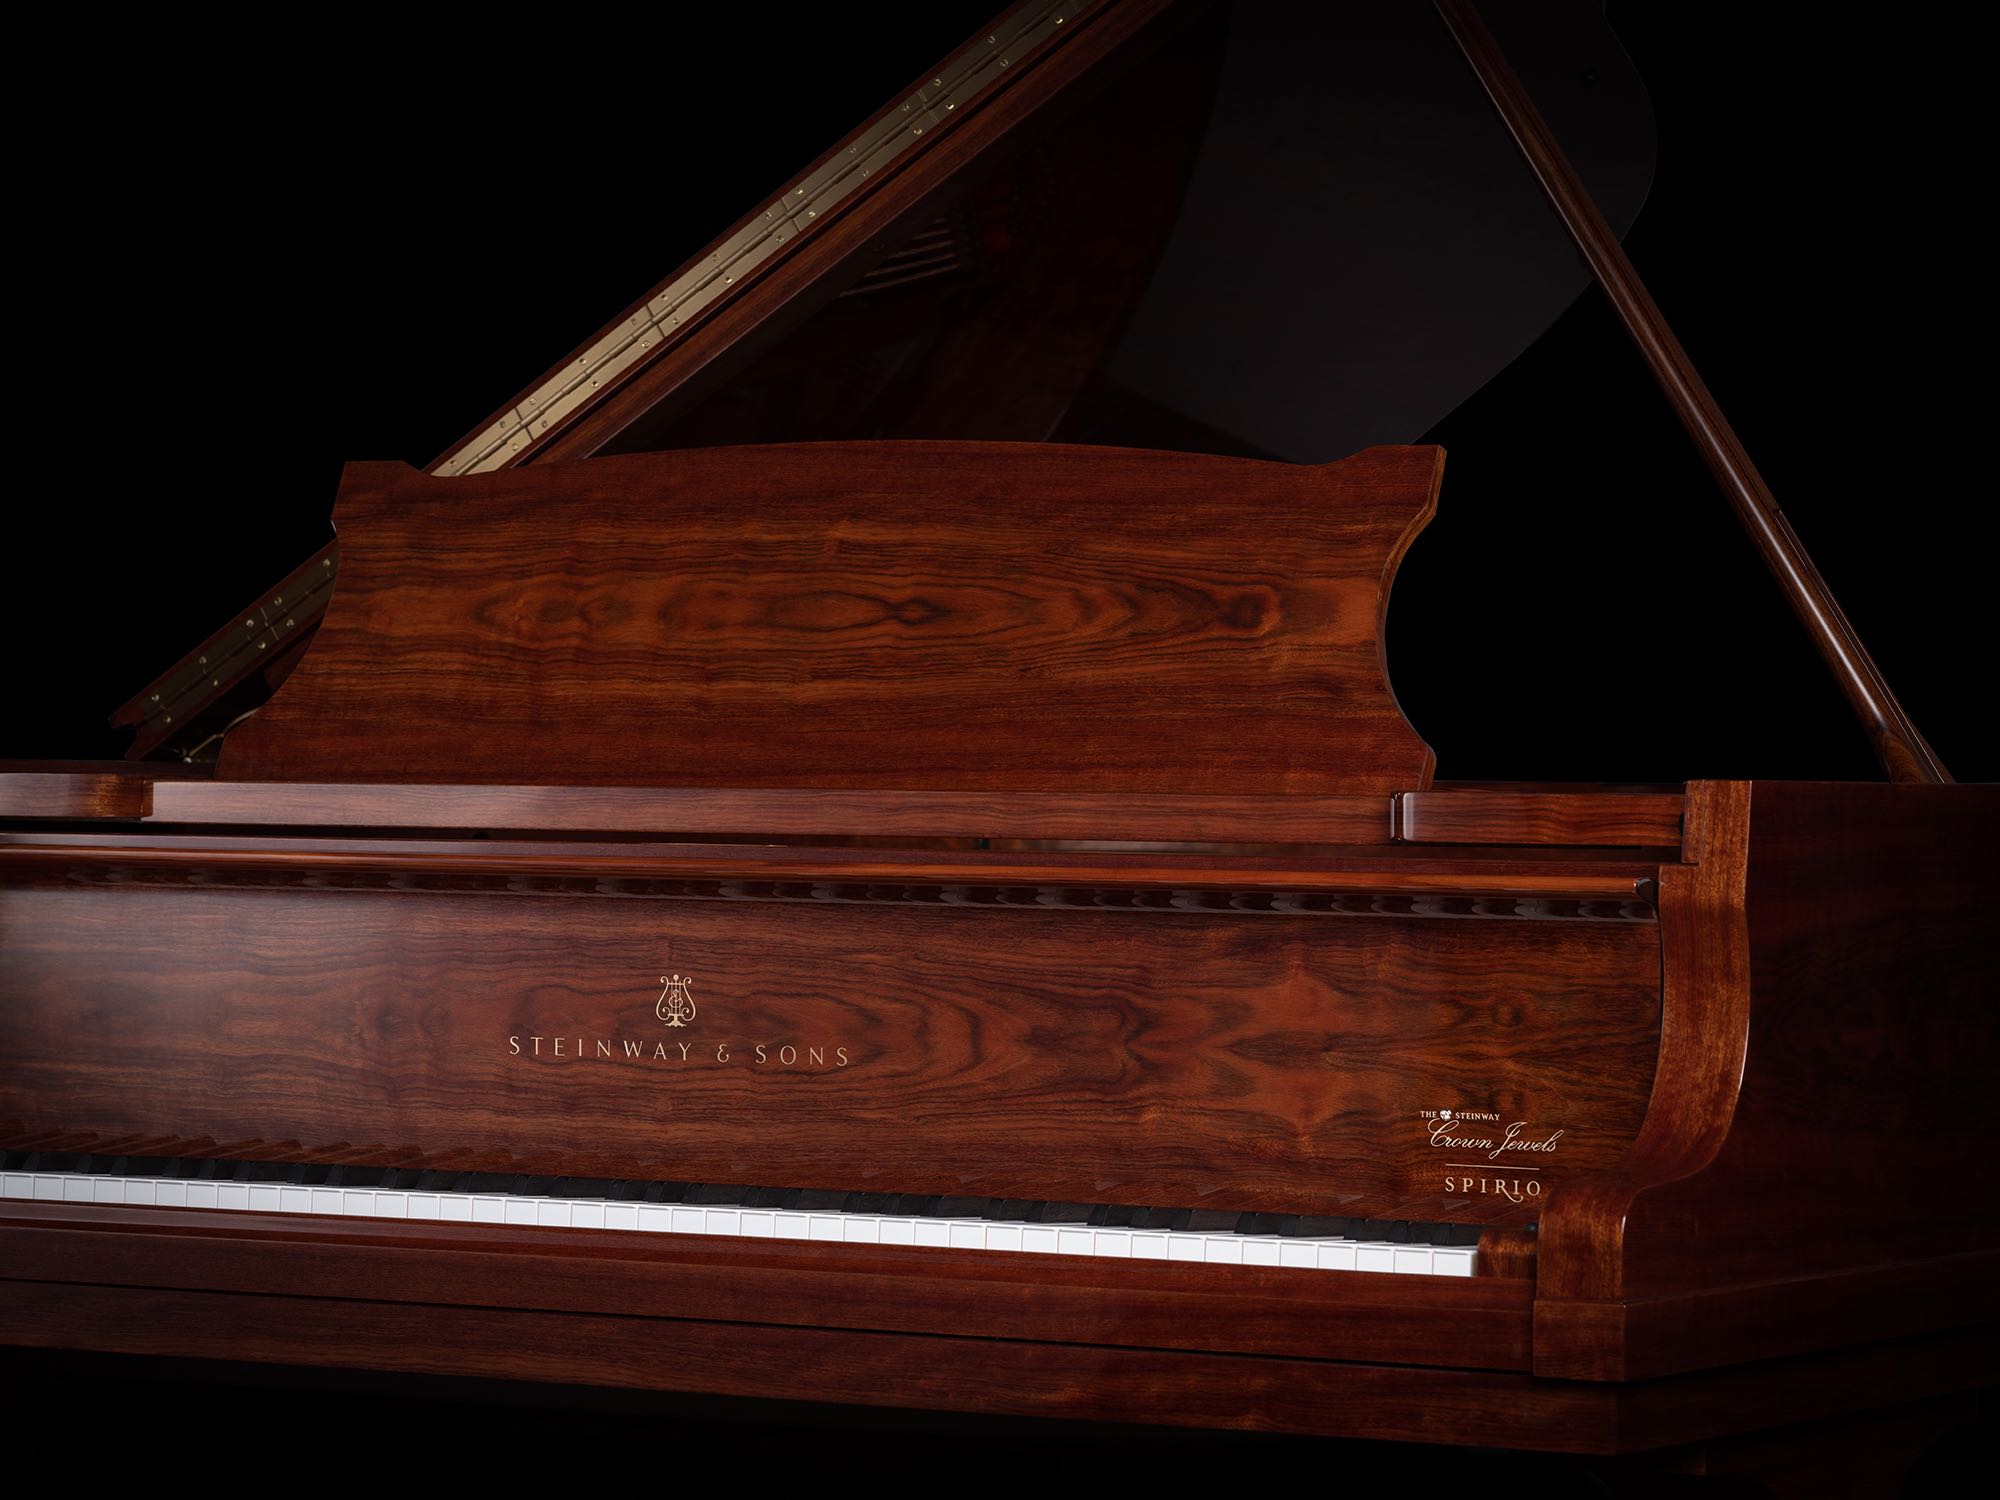 Steinway & Sons Piano Product Photography Photographer Singapore COCO Creative Studio 2